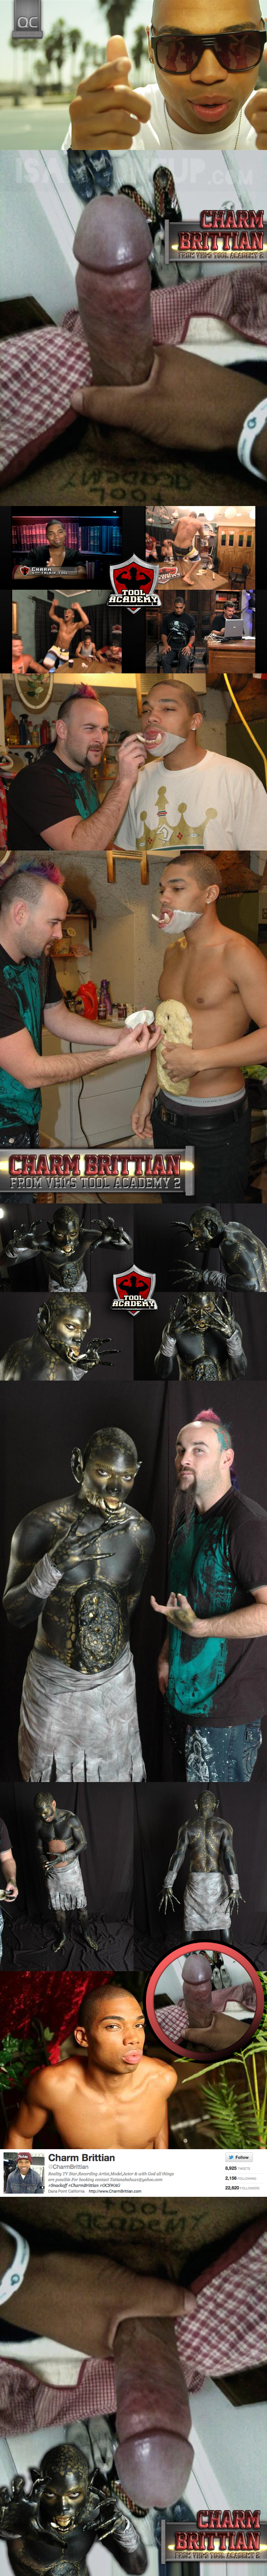 Tool Exposed: Charm Brittian From VH1's Tool Academy 2